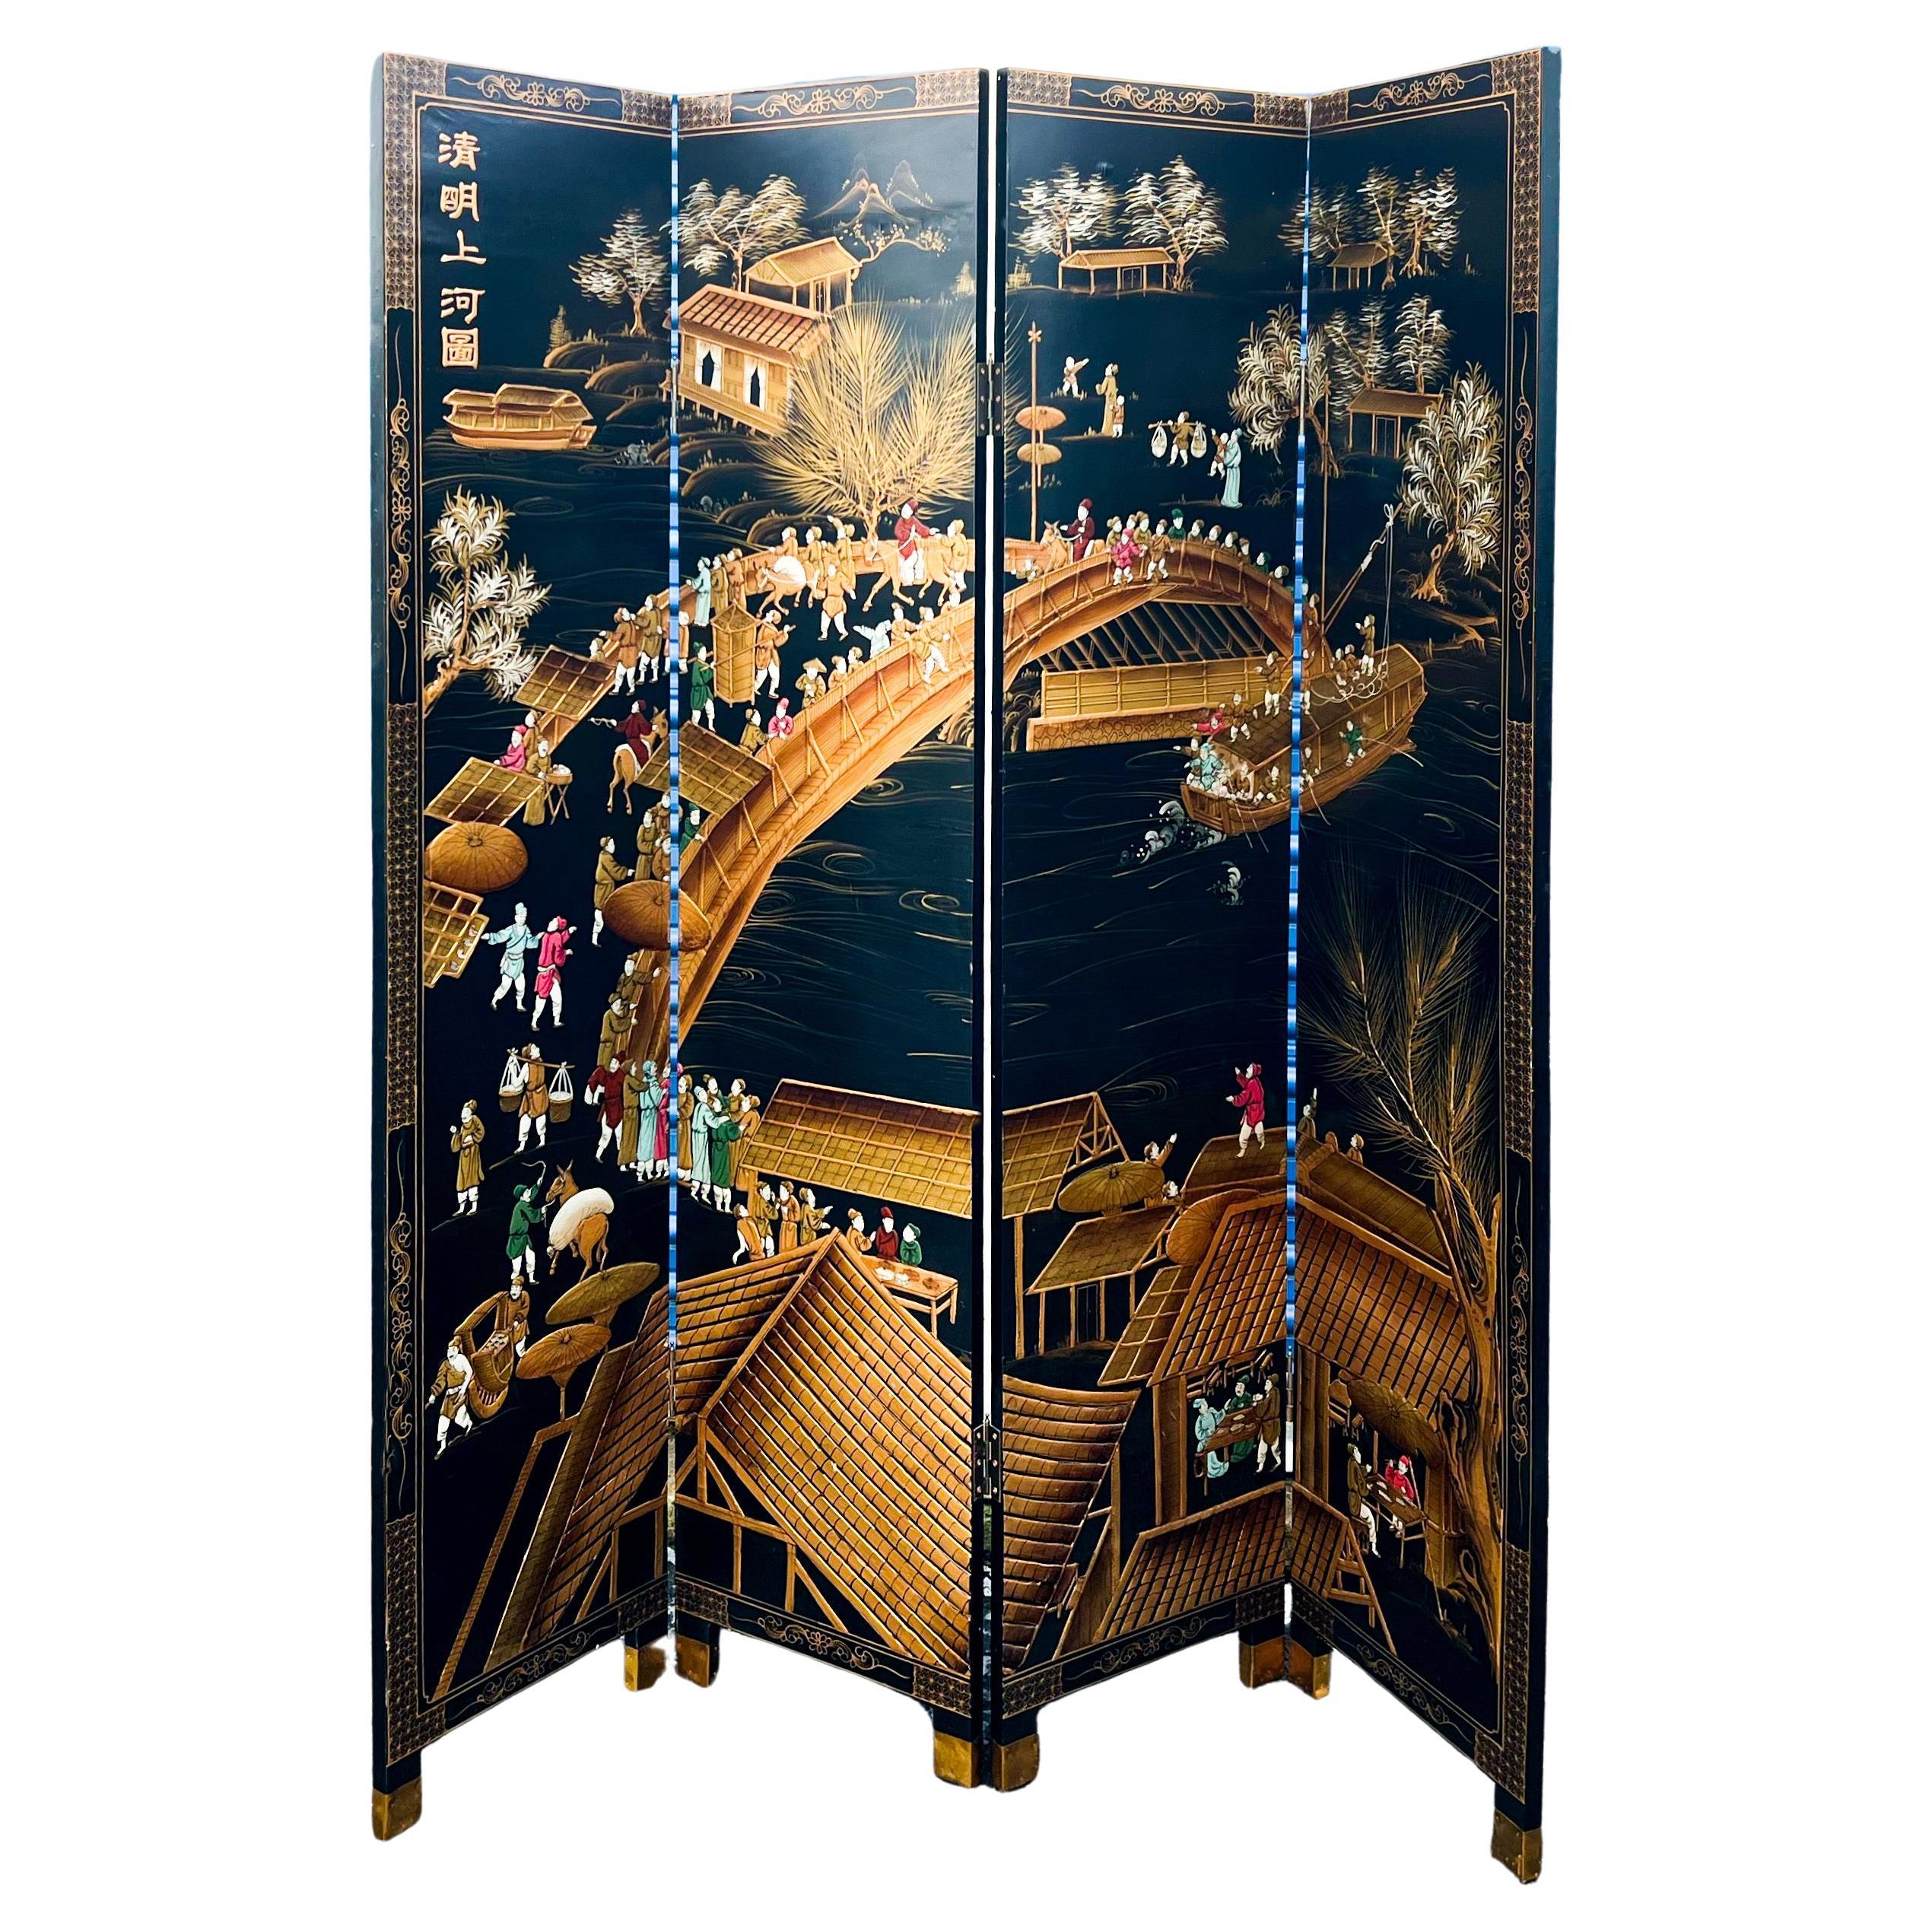 Chinoiserie Black Lacquer Screen Att. Decorative Crafts, 4 Panel Wall Art For Sale